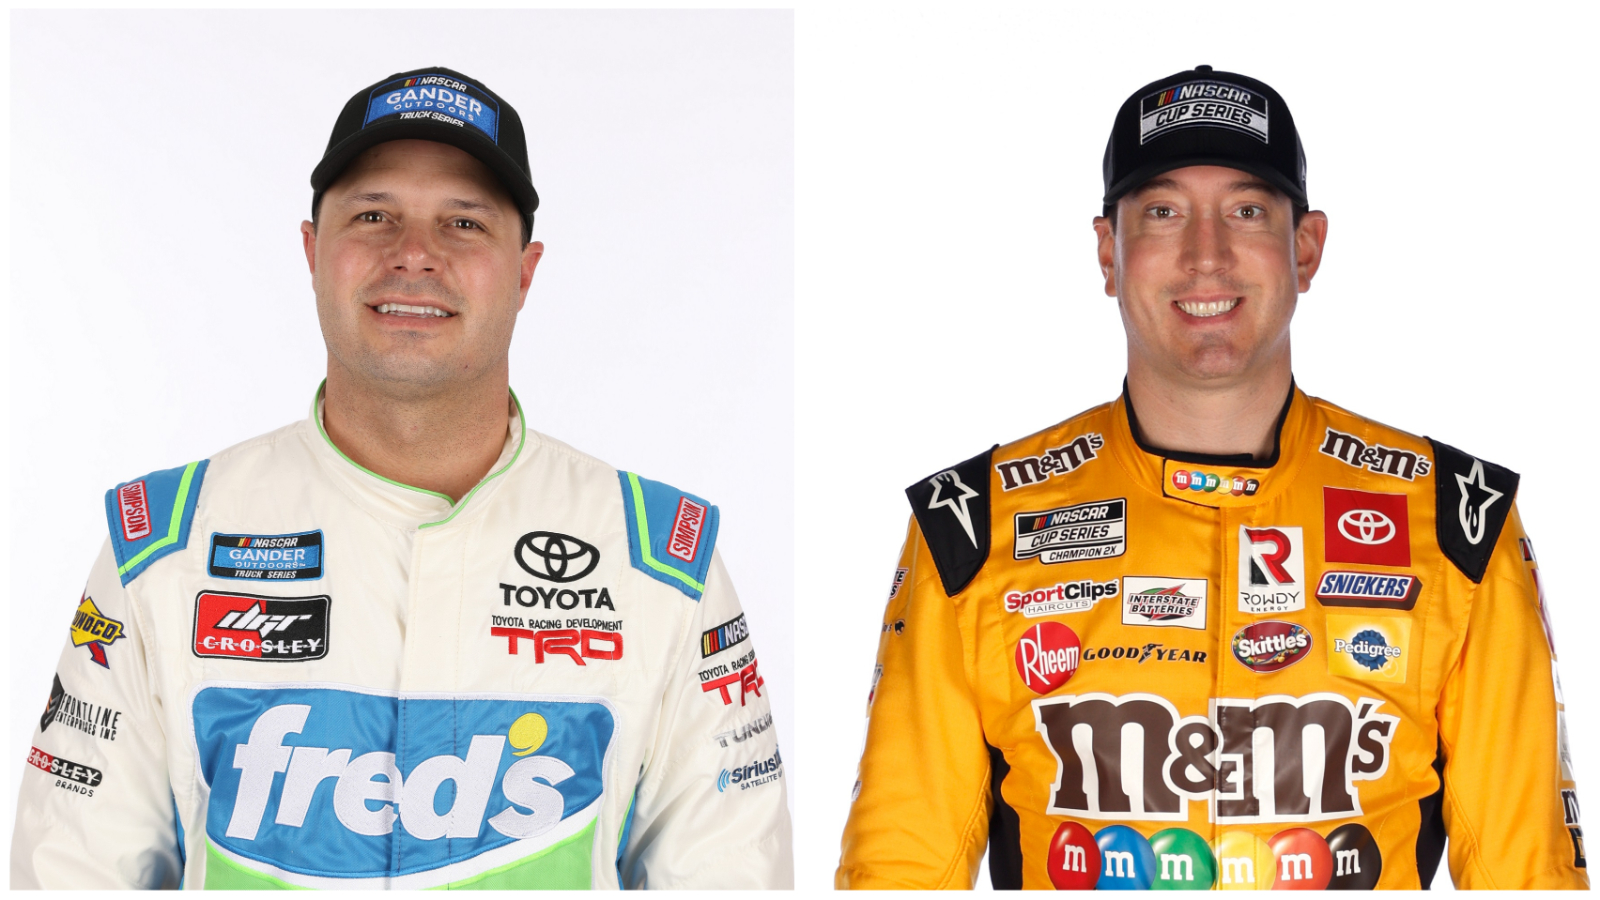 Kyle Busch and David Gilliland Are Shaking up the Truck Series, Leaving Drivers Like Hailie Deegan in Limbo